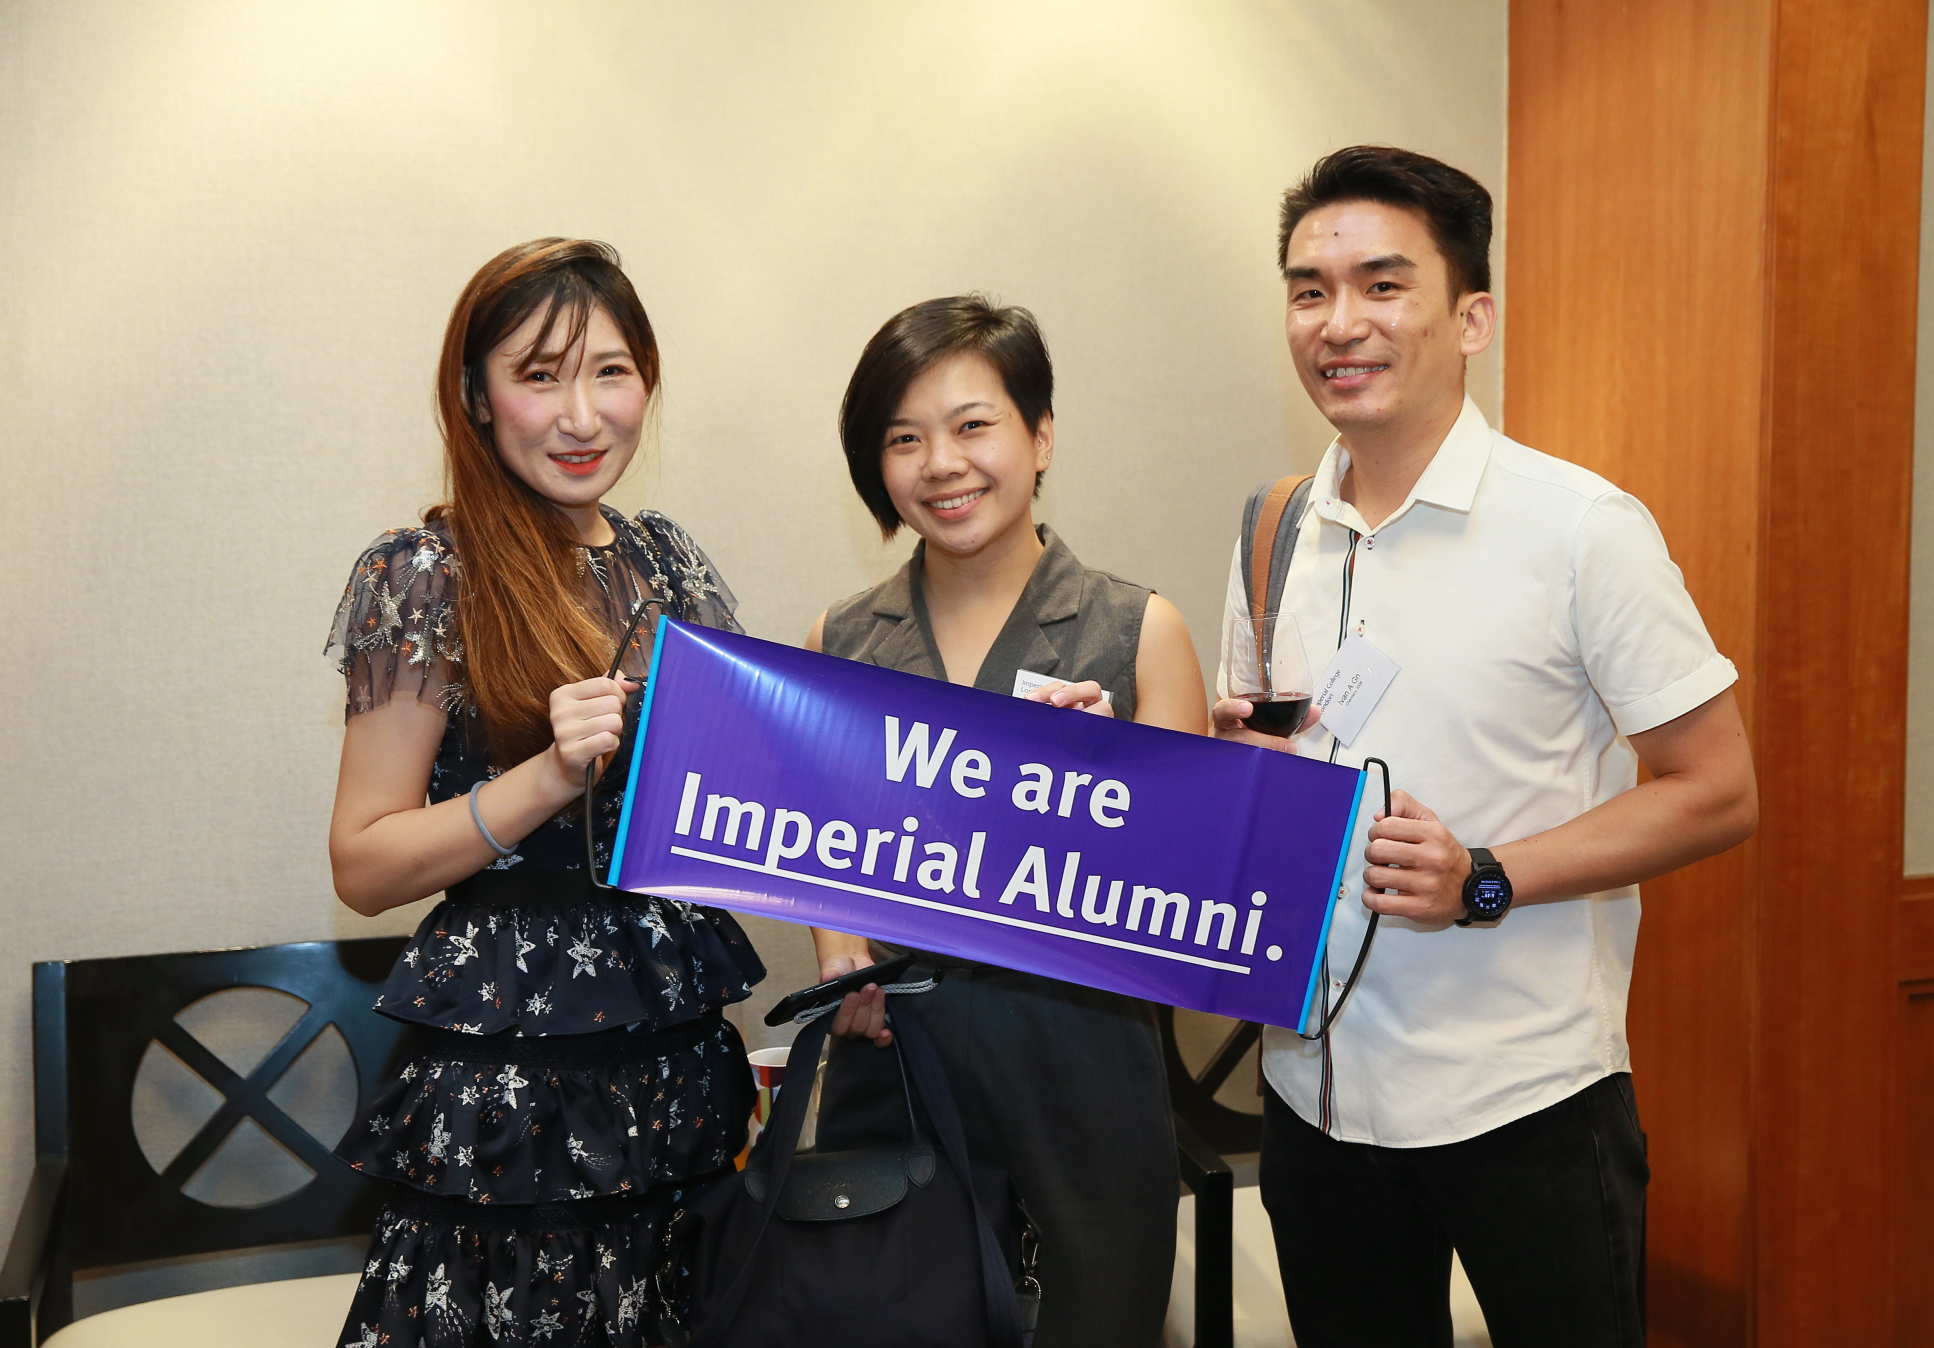 Alumni at the special event in Singapore